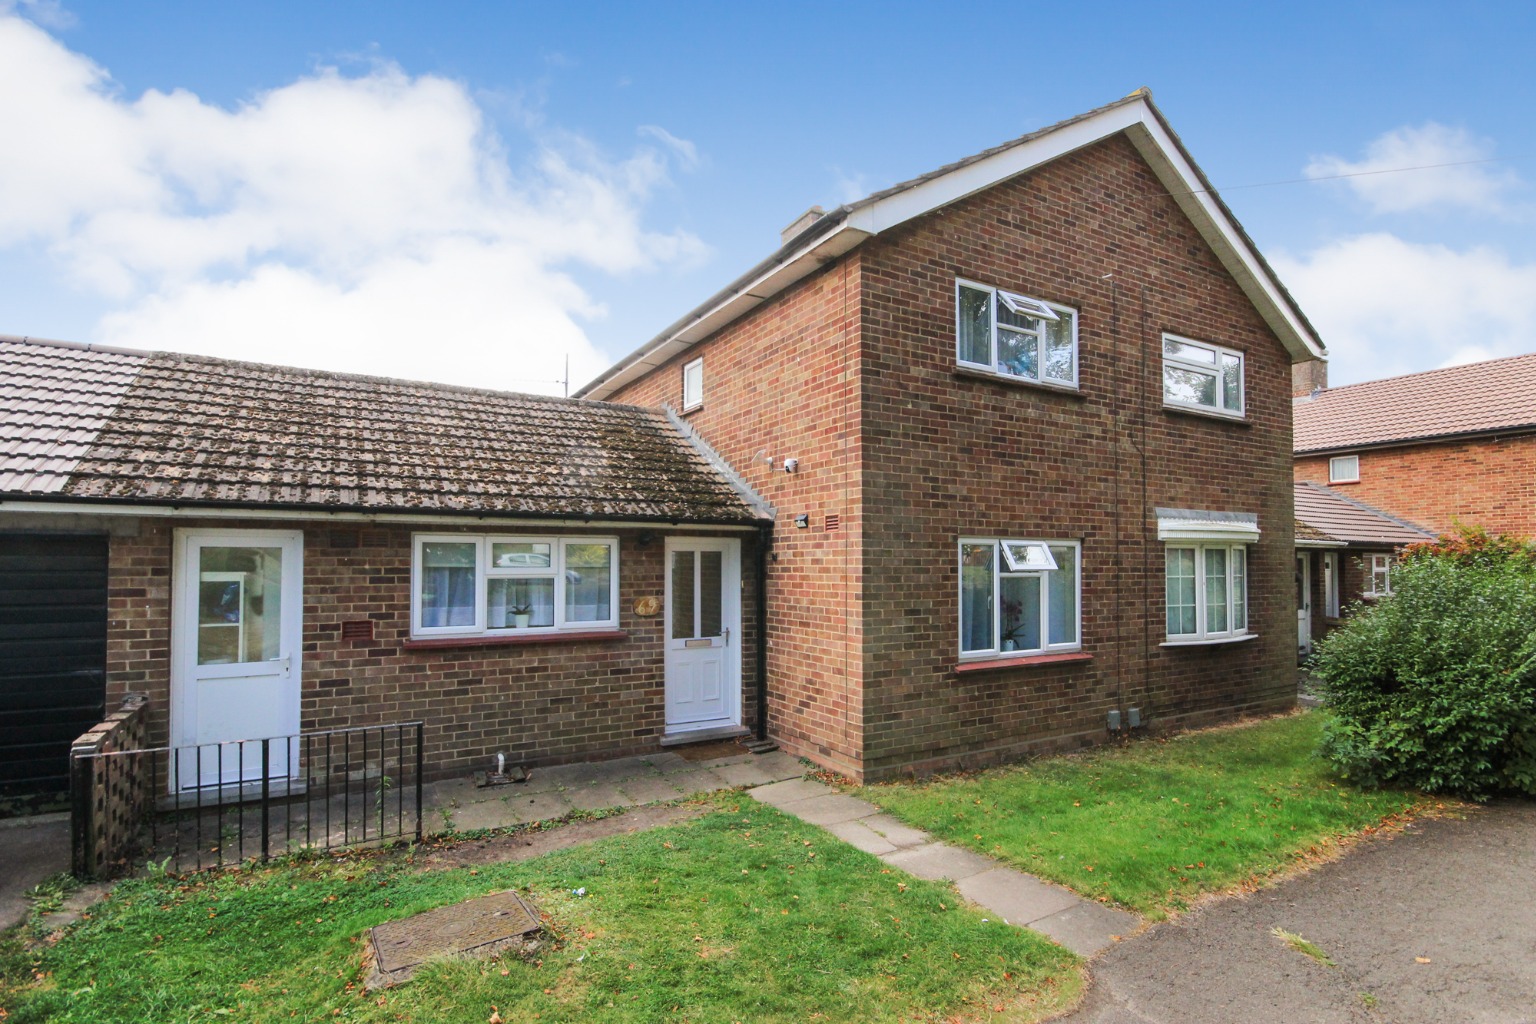 3 bed semi-detached house for sale in Meadway, Bedford - Property Image 1